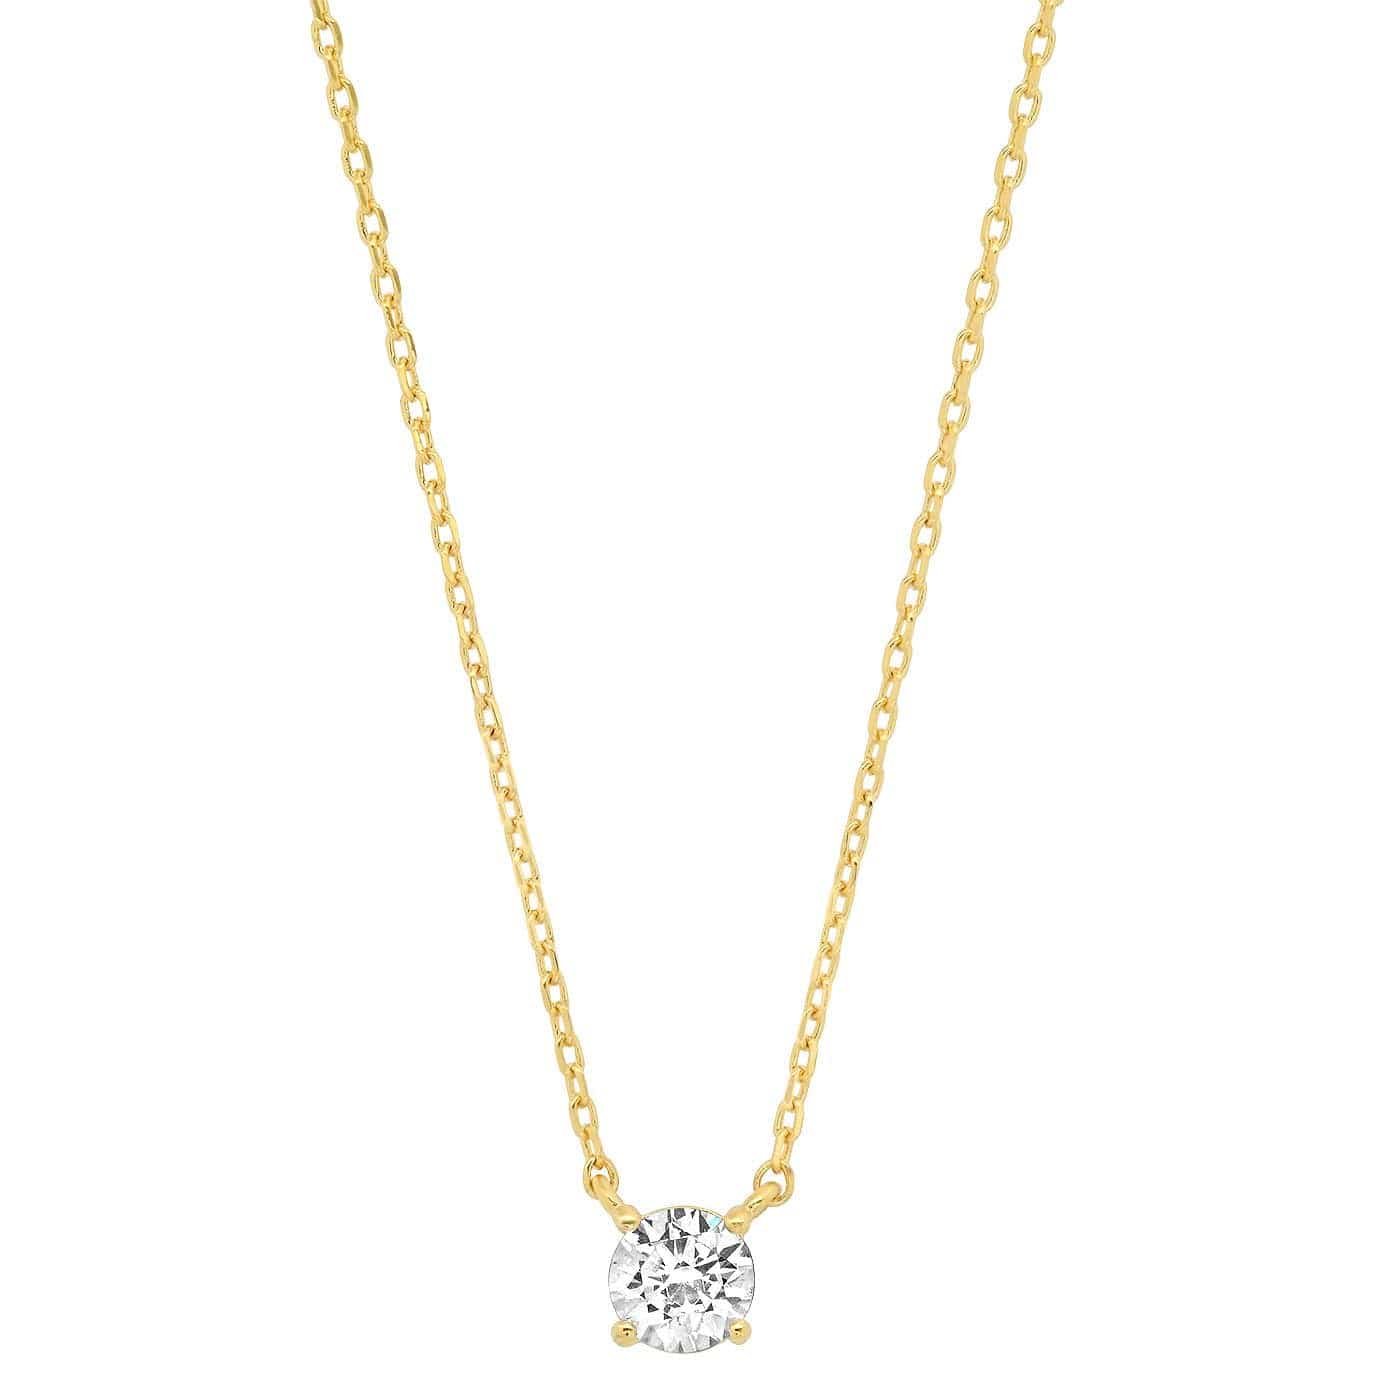 TAI JEWELRY Necklace Gold Vermeil Simple Chain With Small Round Cut CZ